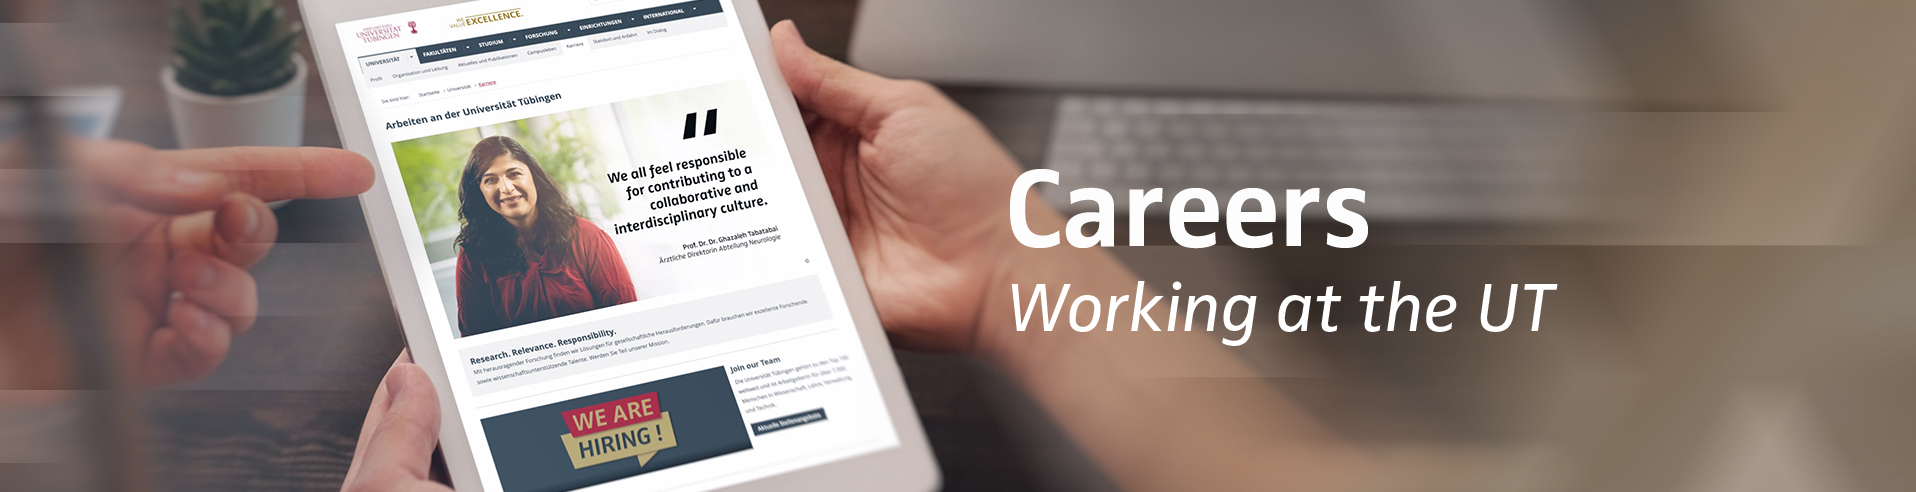 Tablet with Website open. Text: Careers, working at the UT